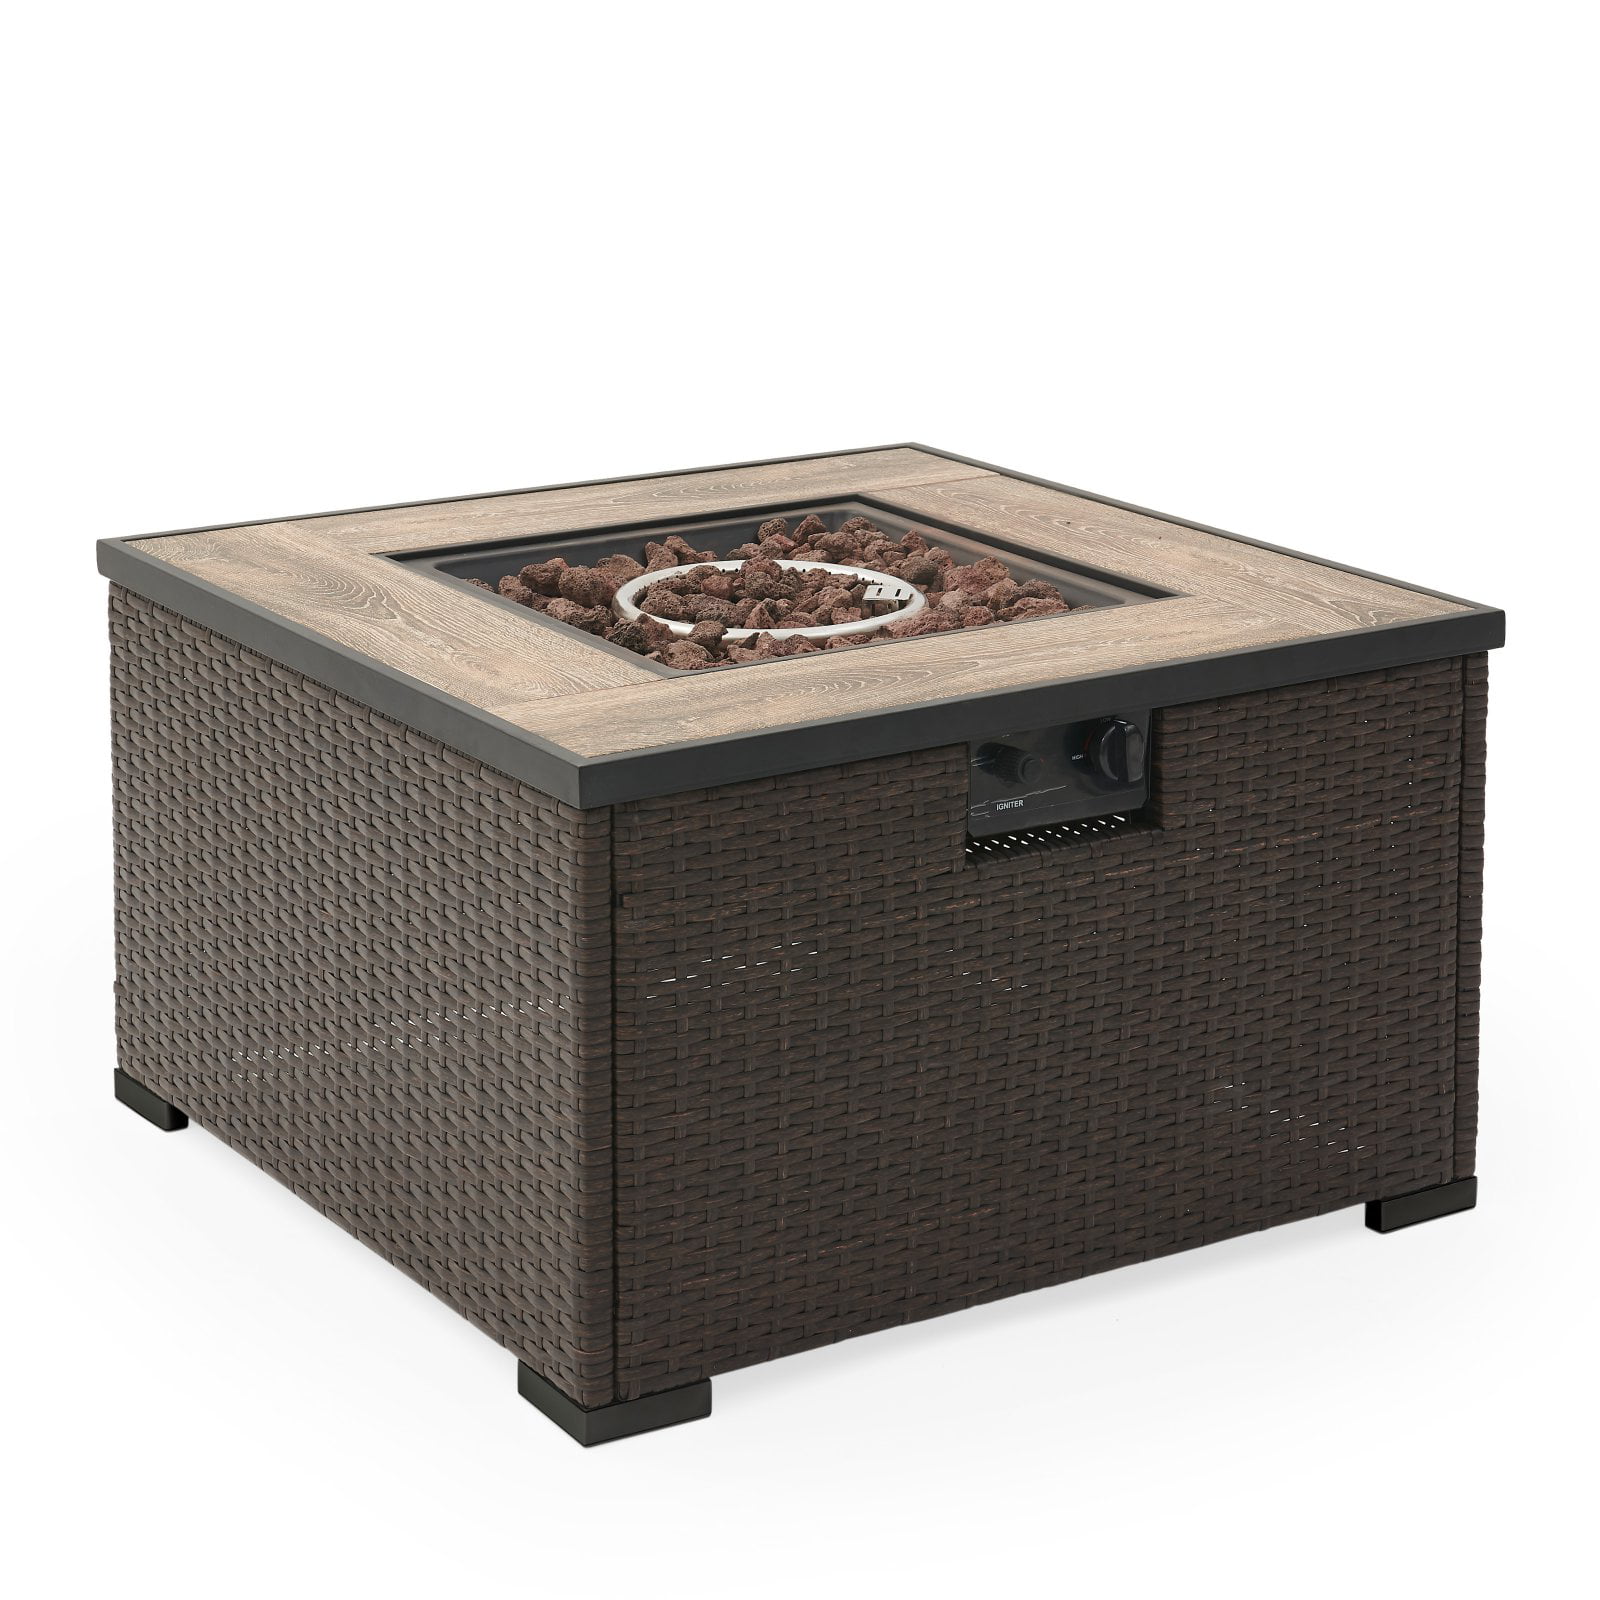 Belham Living Wadeview 31 In Gas Square Wicker Fire Pit Table Walmart Com